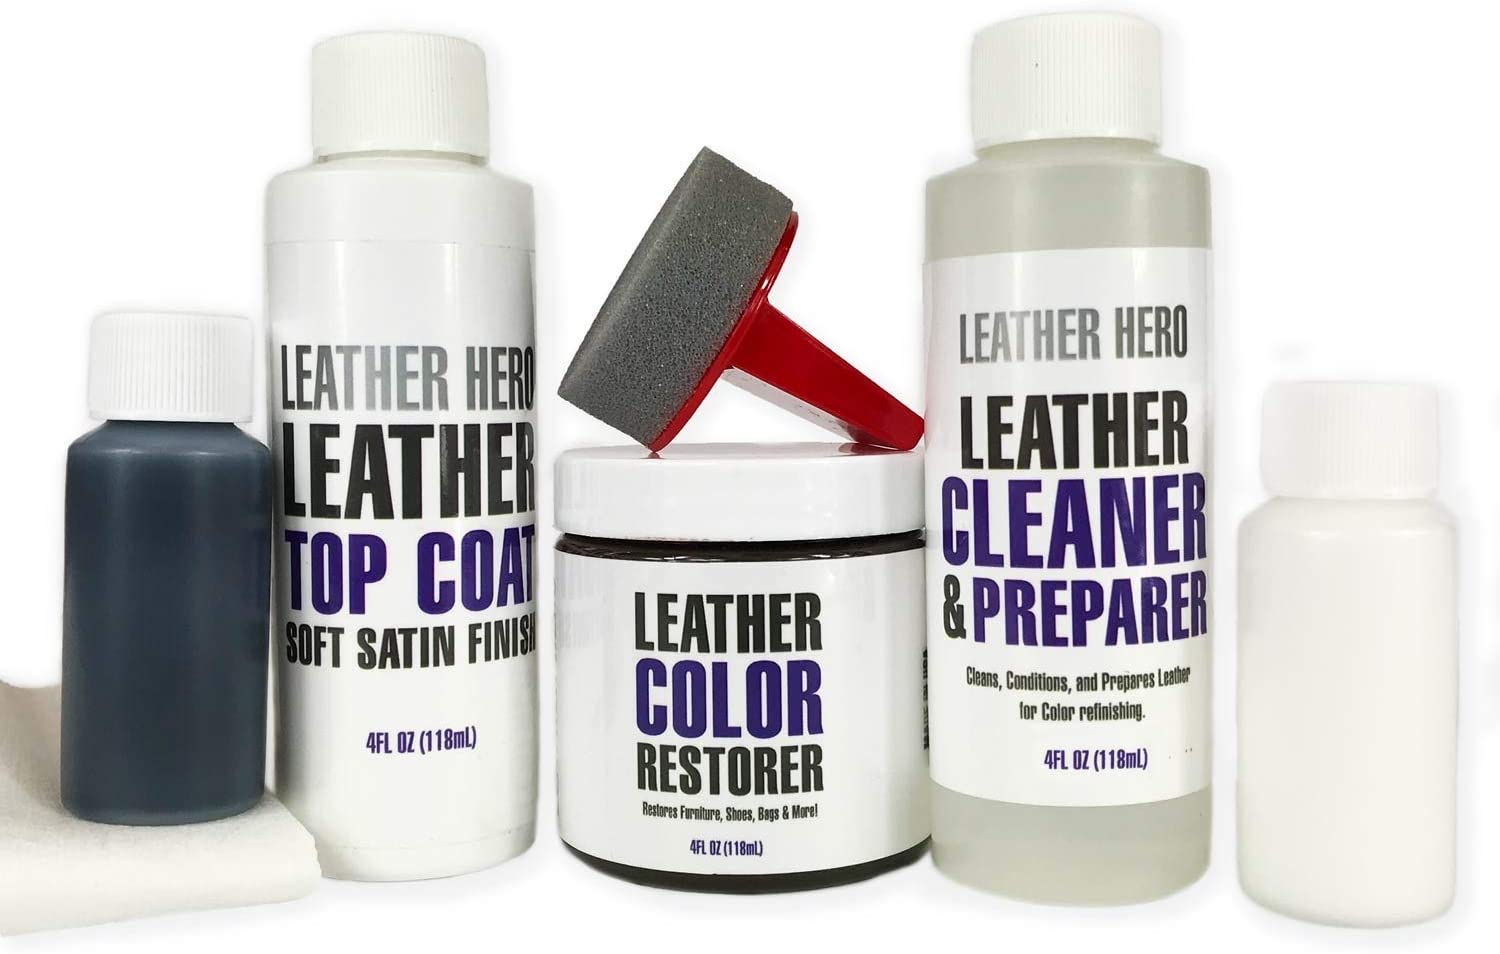 Vinyl And Leather Repair Kit For Couches Leather Repair Kit For Furniture  Jacket Car Seats Purse